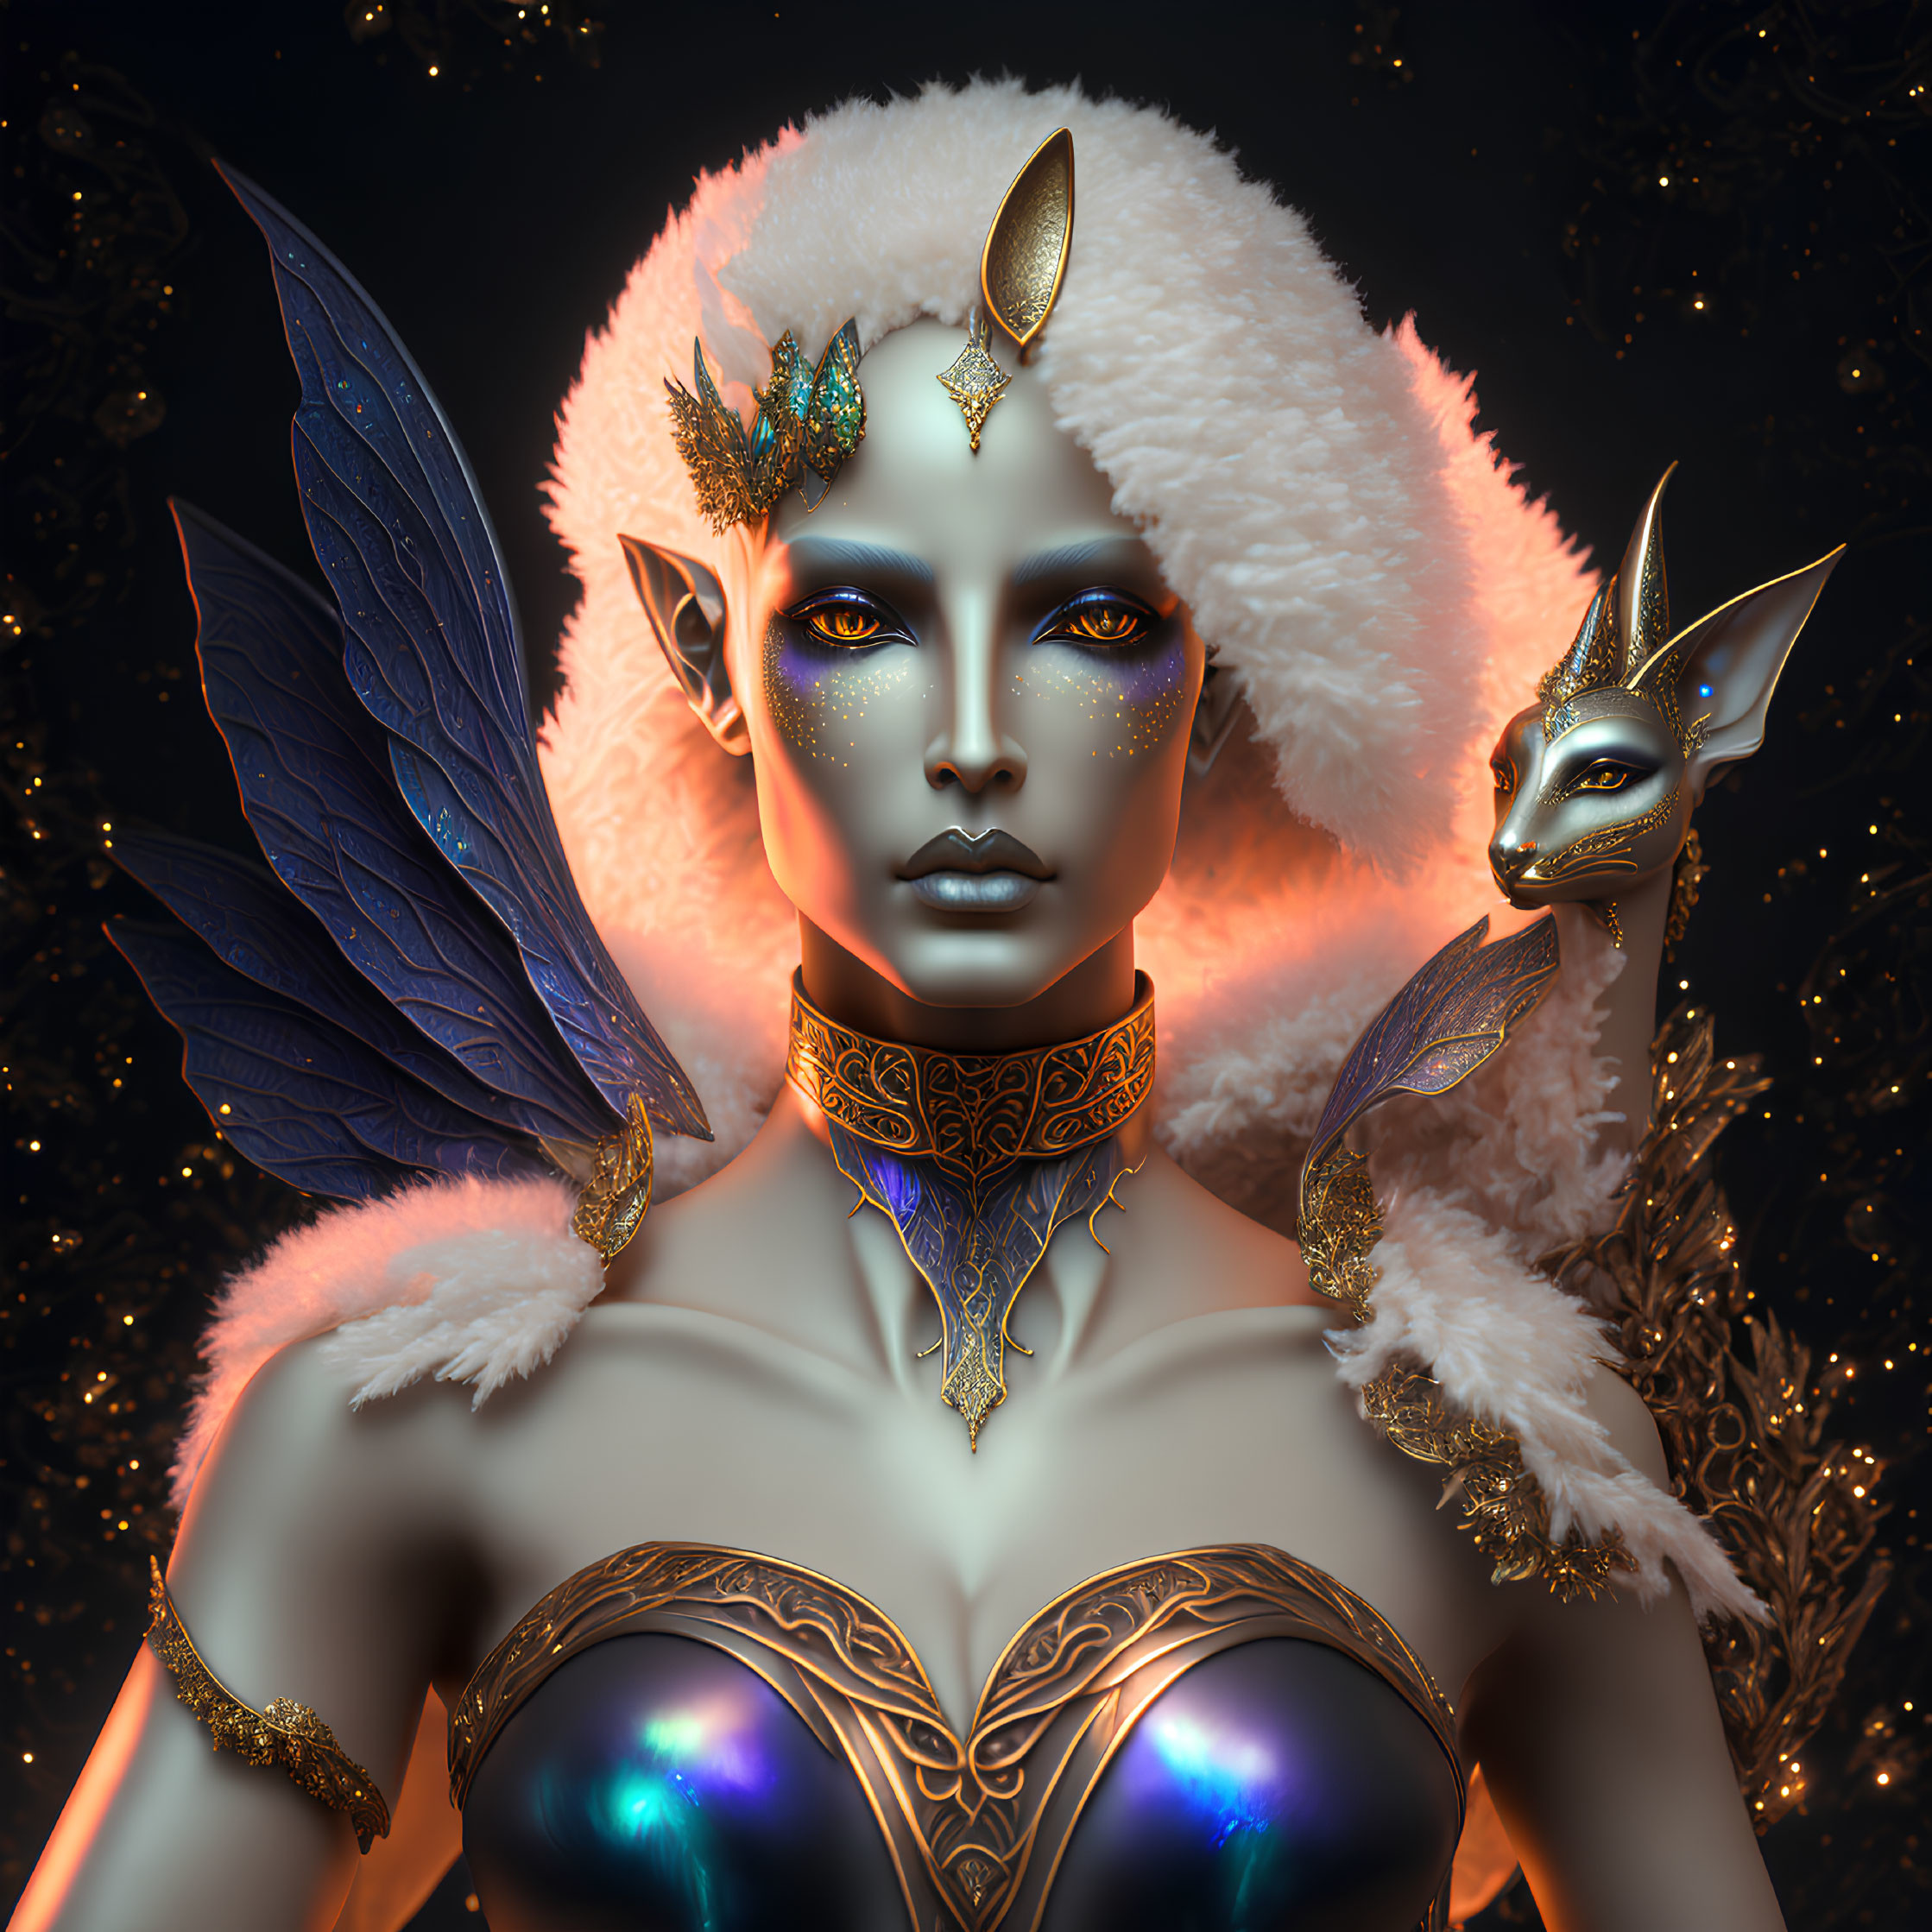 White-Skinned Ethereal Being with Golden Accessories and Blue-Eyed Creature on Starry Background